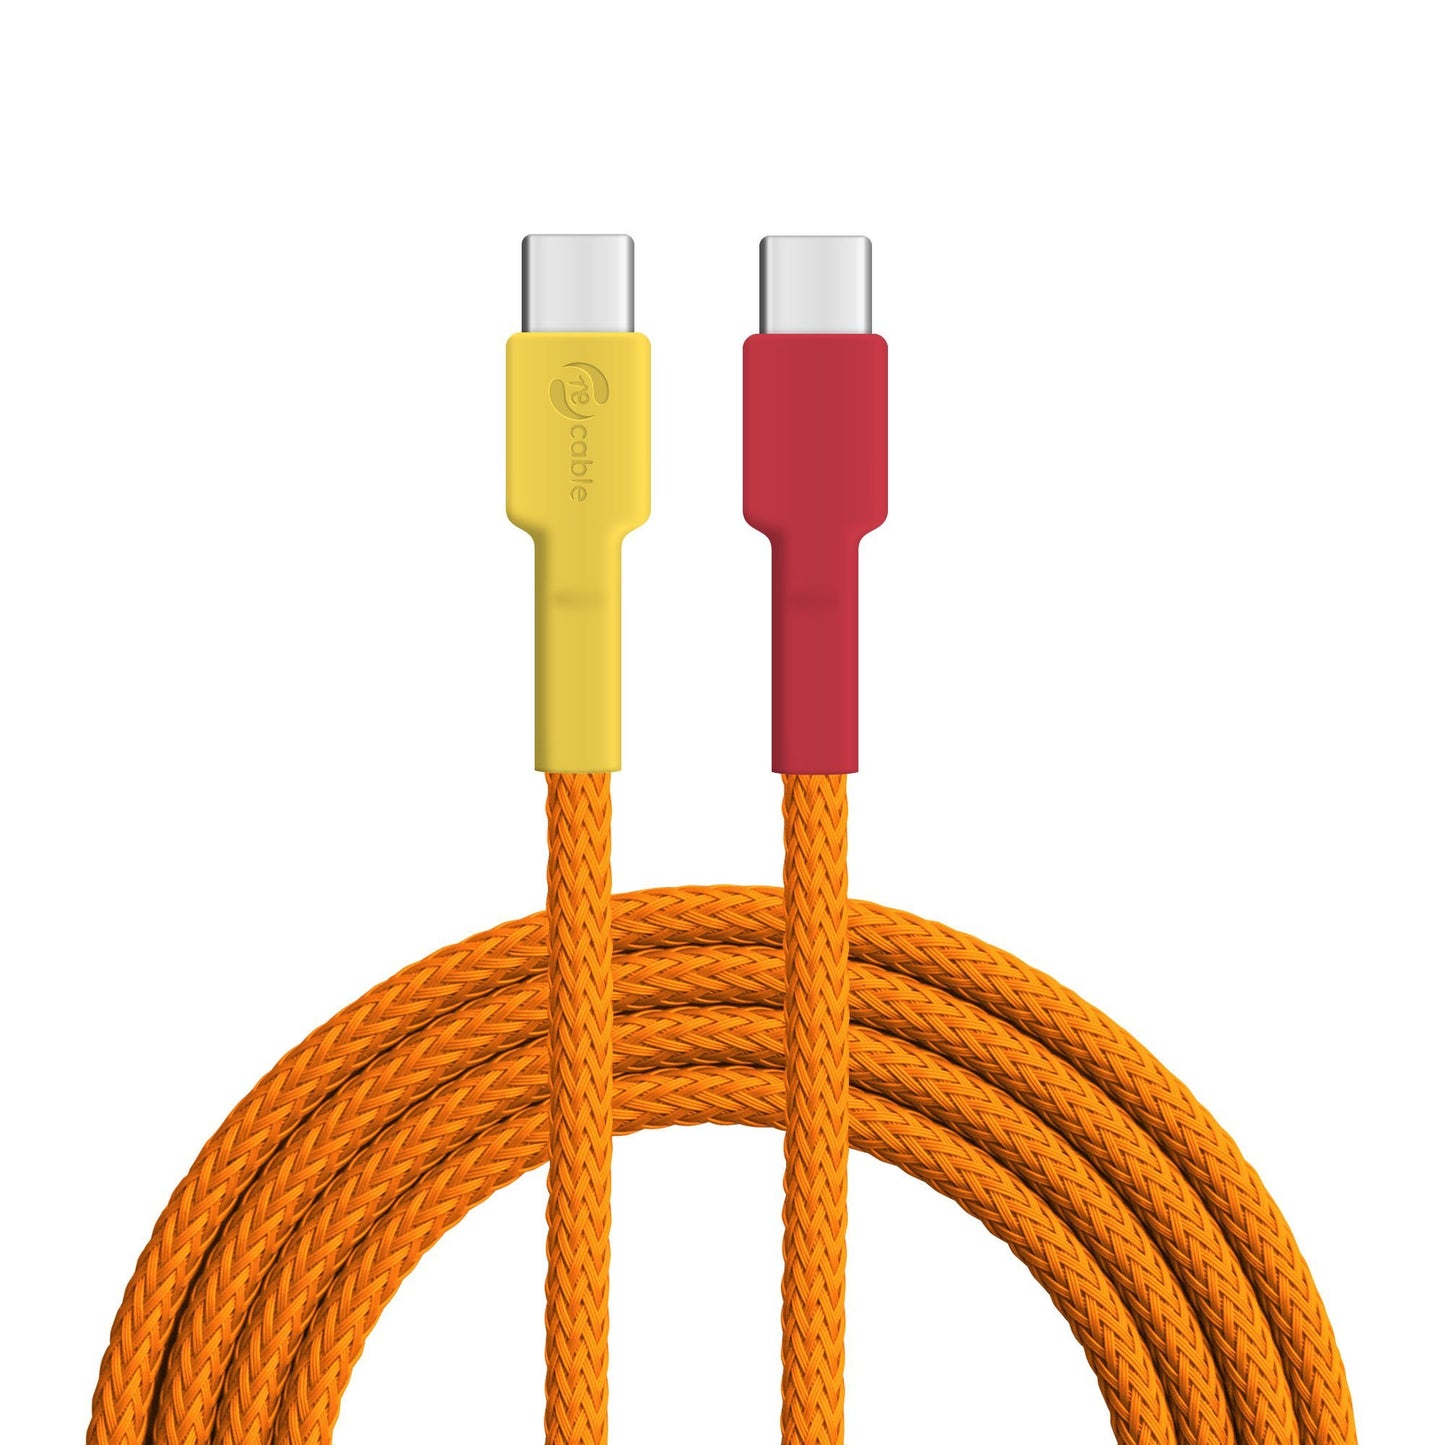 USB cable, Design: Flame bowerbird, Connections: USB C on USB C